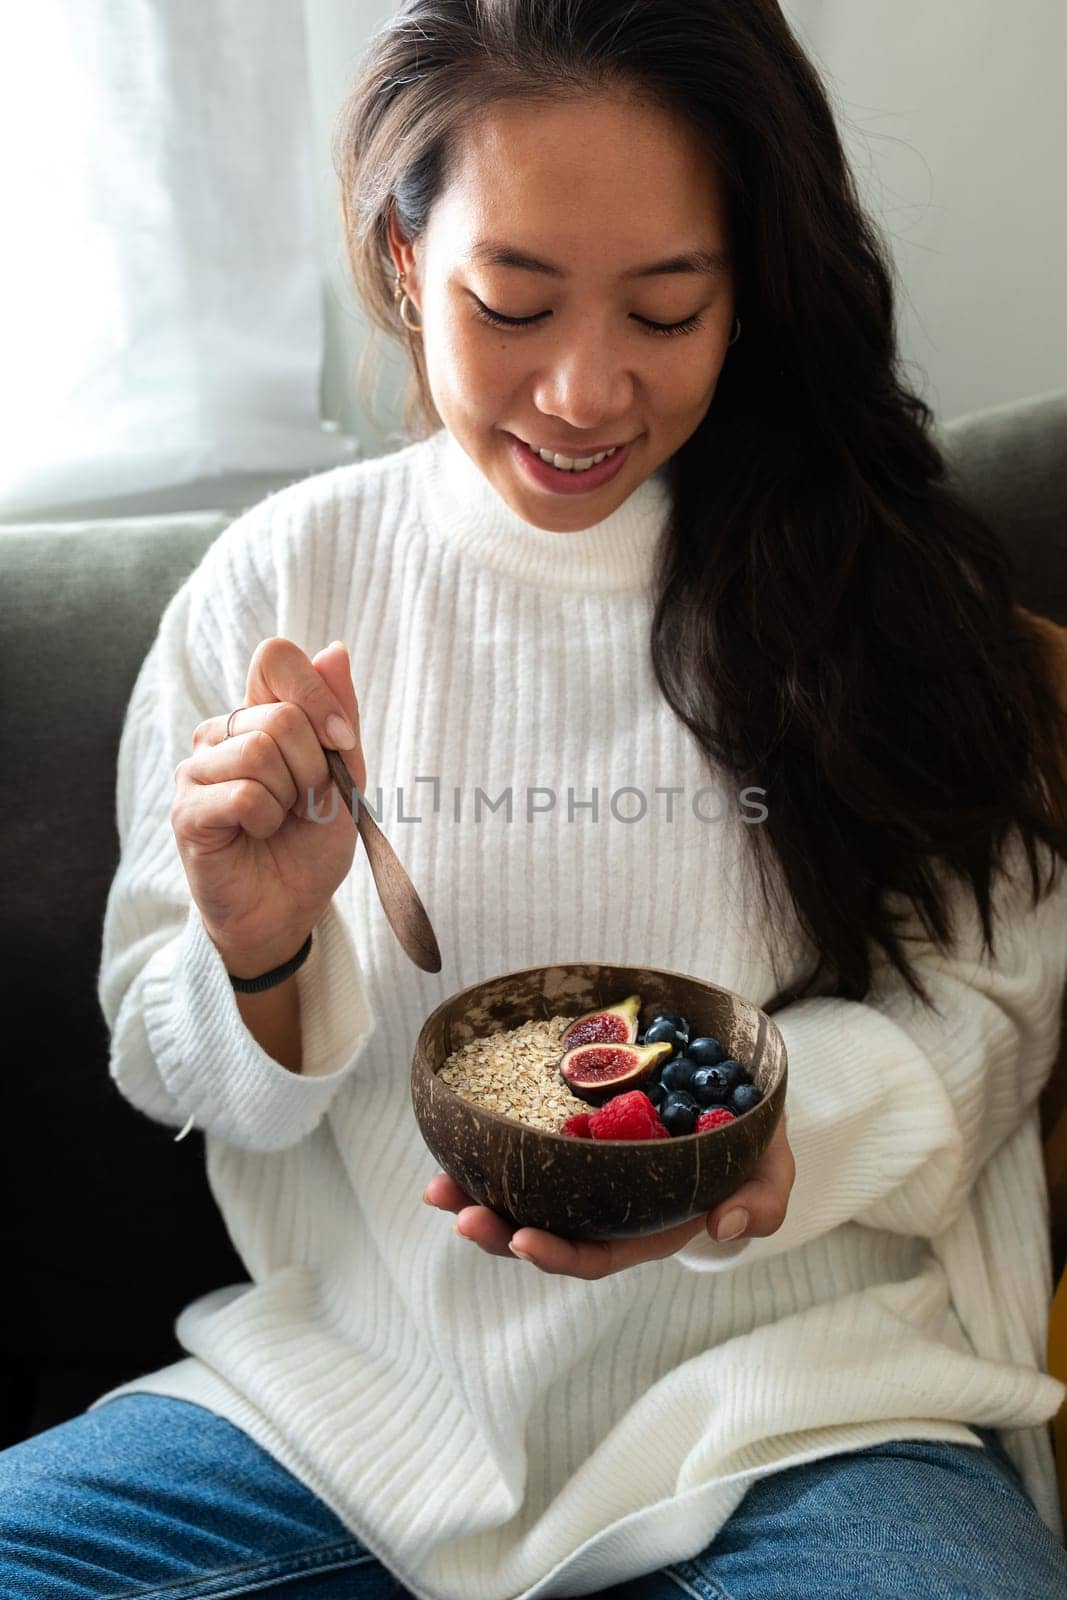 Vertical portrait of happy young Asian woman eating healthy smoothie breakfast bowl of oats and fruit relaxing on the couch. Healthy lifestyle concept.